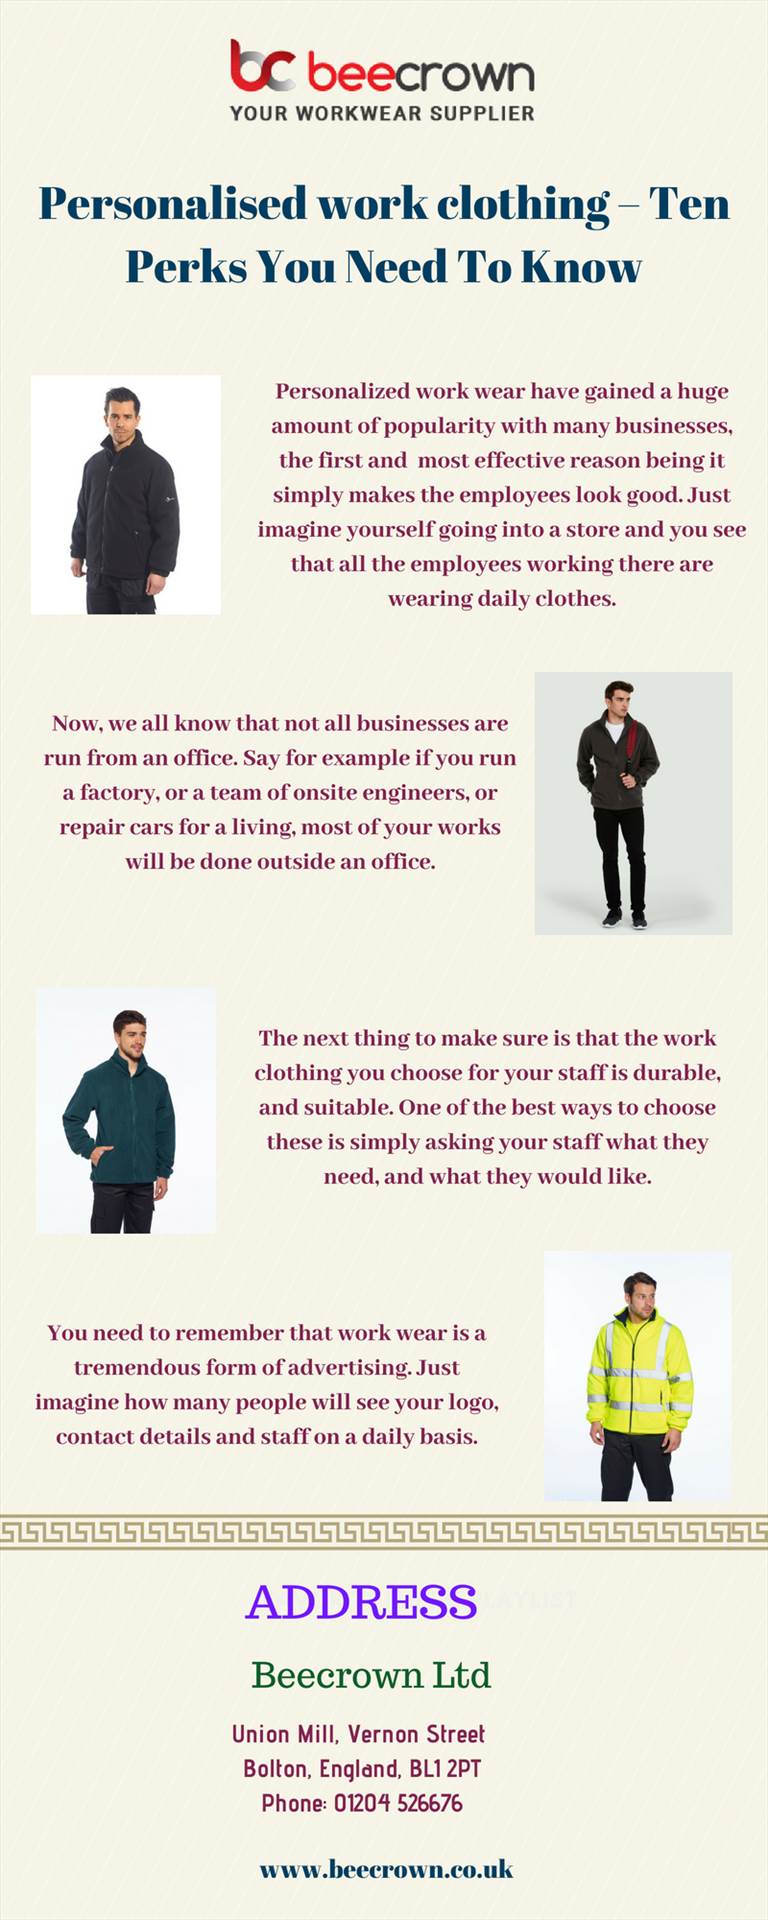 Personalised work clothing – Ten Perks You Need To Know.jpg Personalised work clothing can help you promote your brand even in troubled weather condition. But that’s not all. For more details, visit this link: https://bit.ly/2P4AxnS by Beecrown